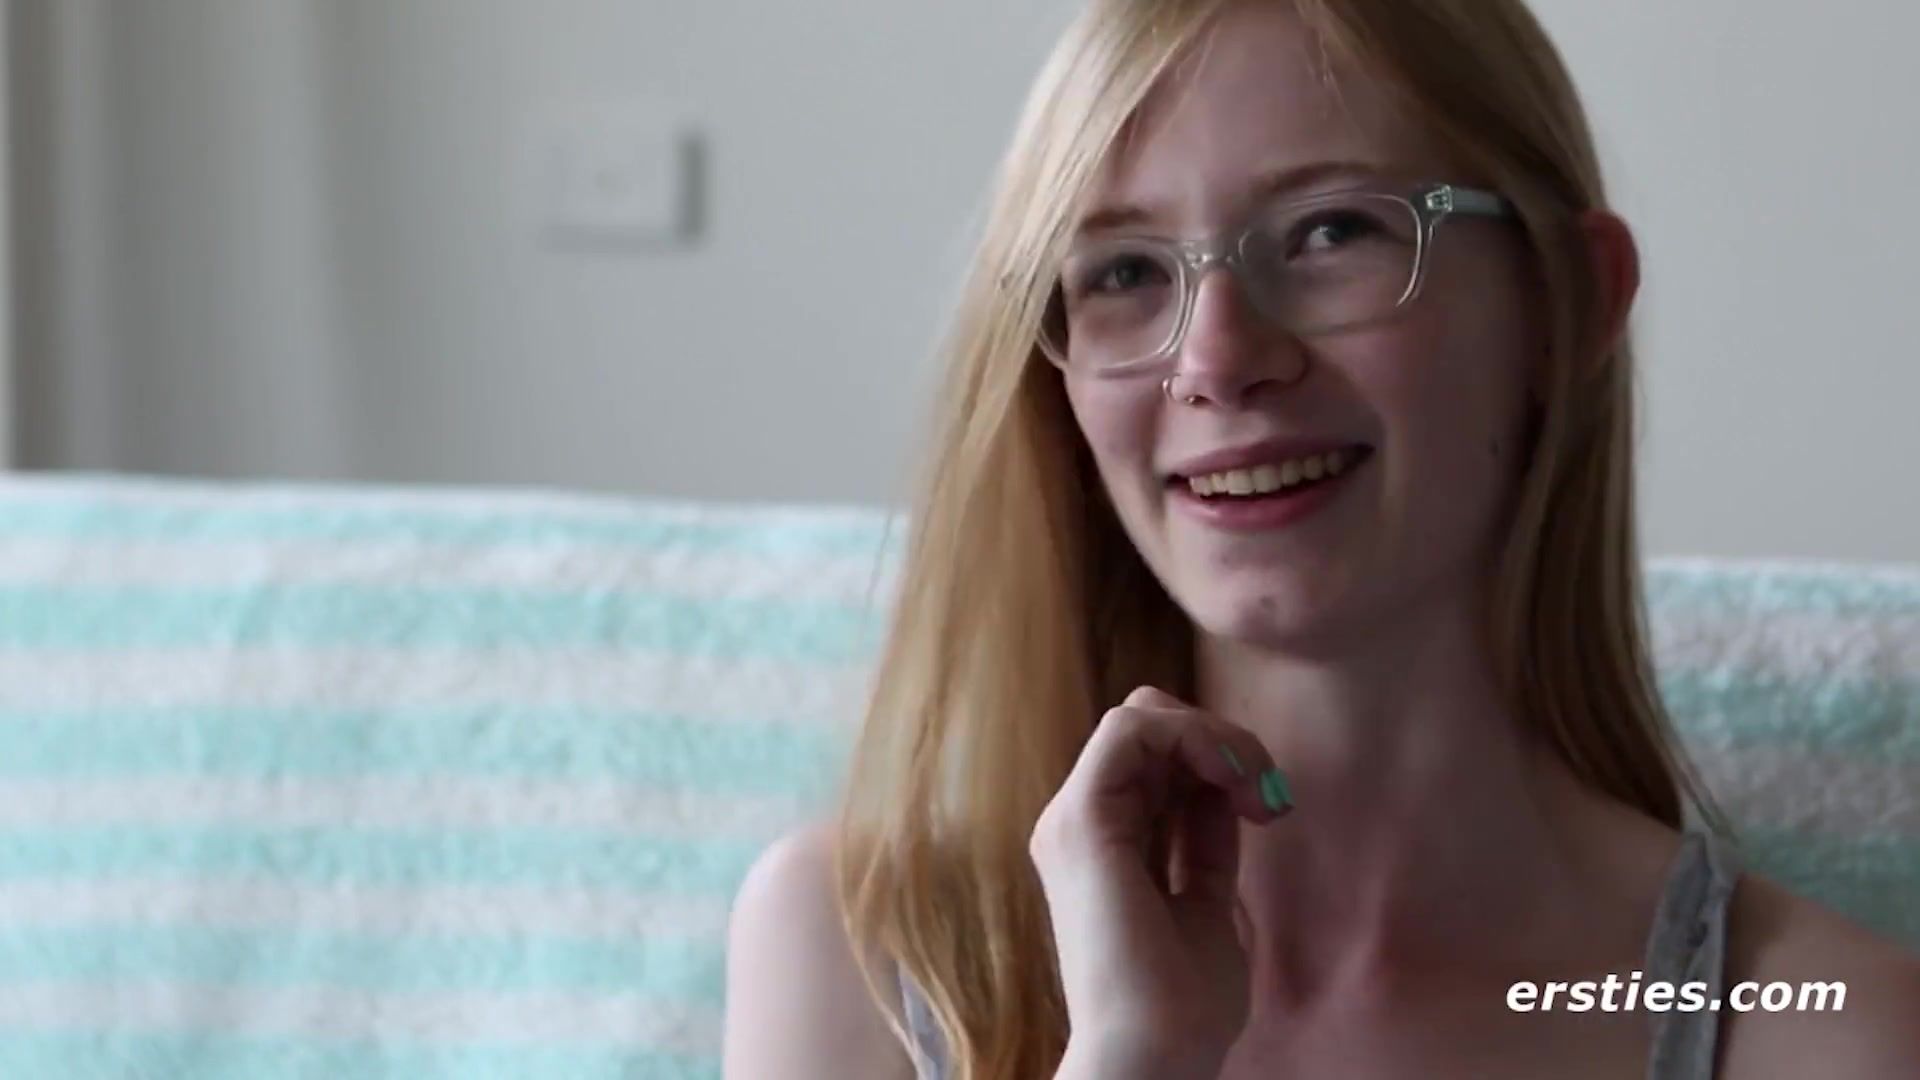 Shy Blonde Nerd Girl in Glasses Gives Us The Sexy Tour Of Her Body image picture